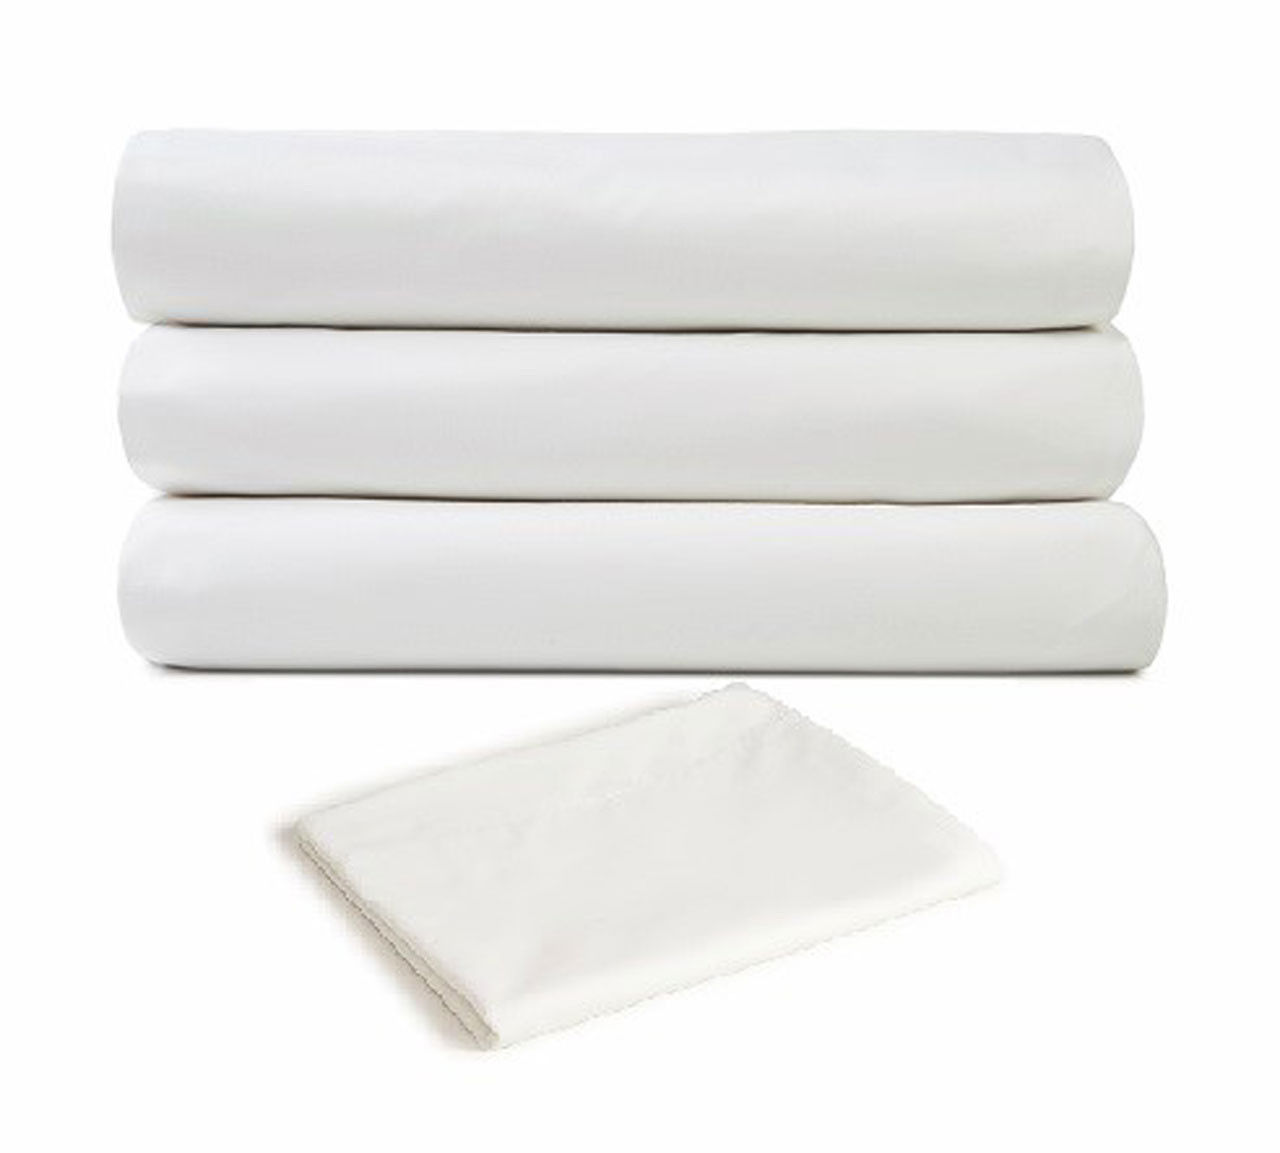 Are the T310 Premium Bed Sheets made of 60/40 cotton poly blend?